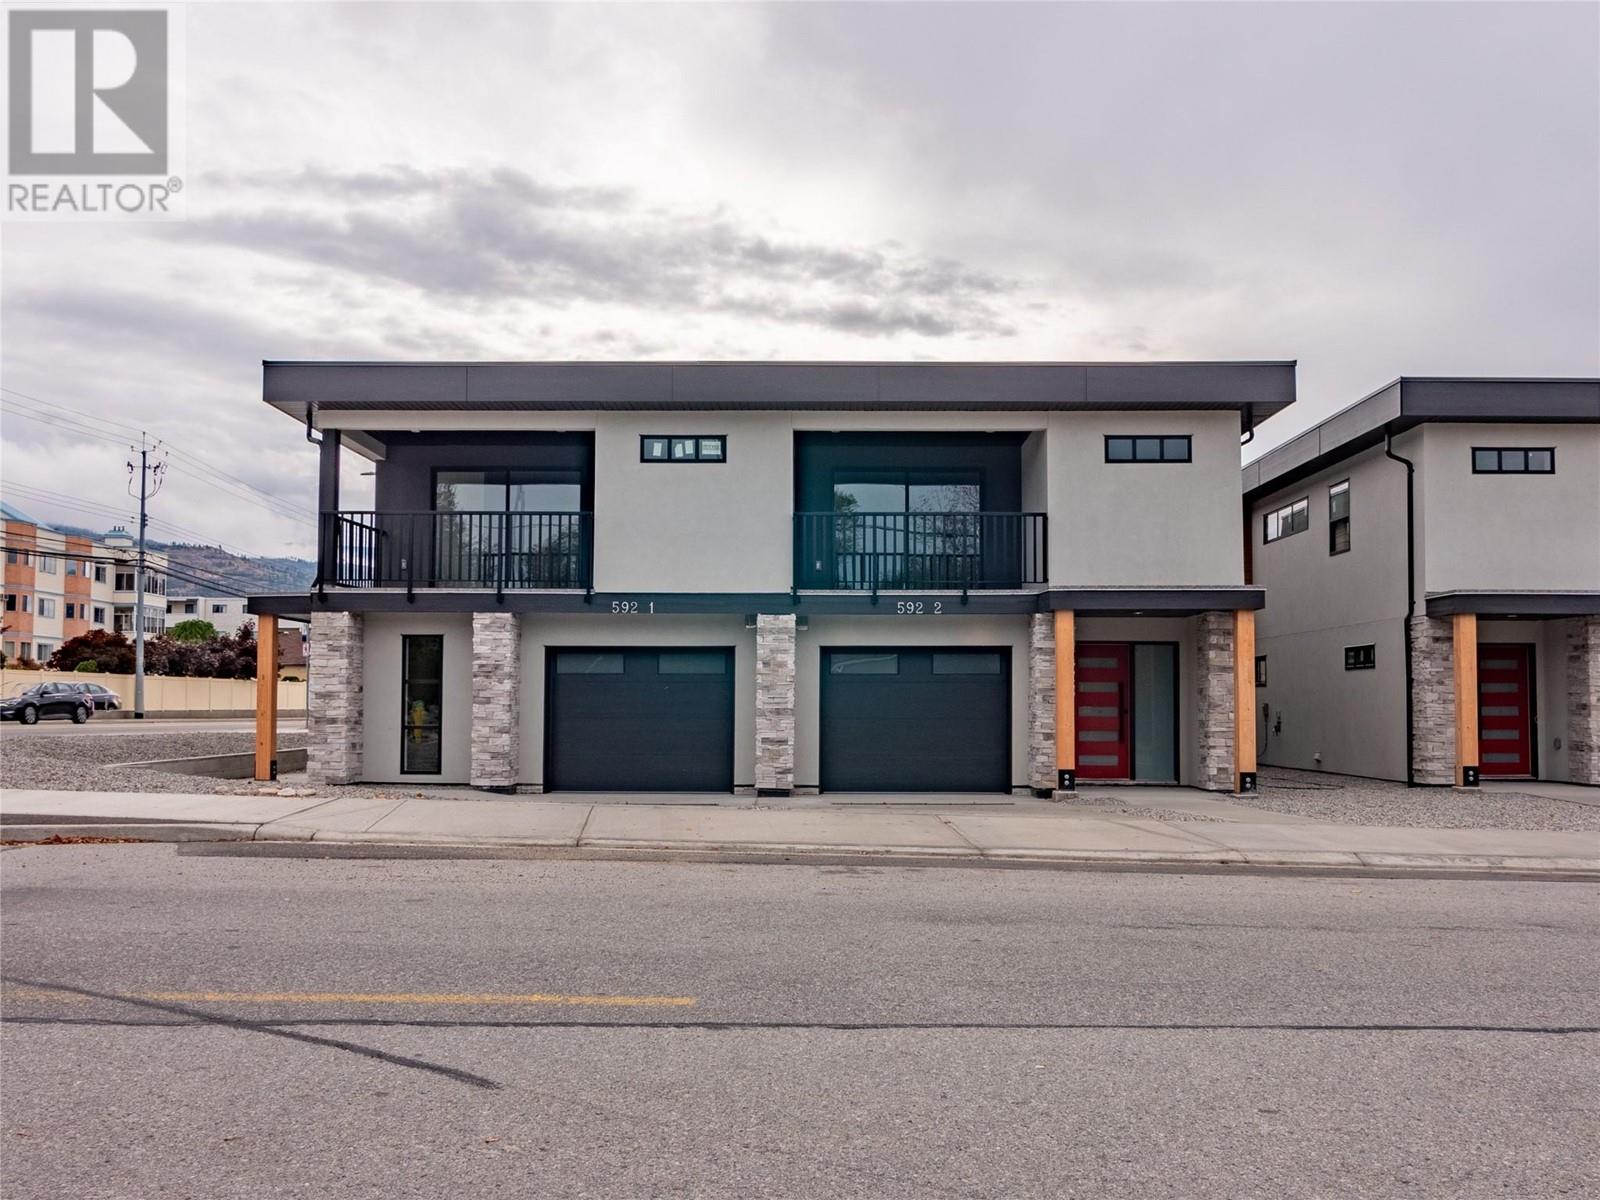 #2 592 Forestbrook Drive,, Penticton, British Columbia  V2A 4T8 - Photo 5 - 201627